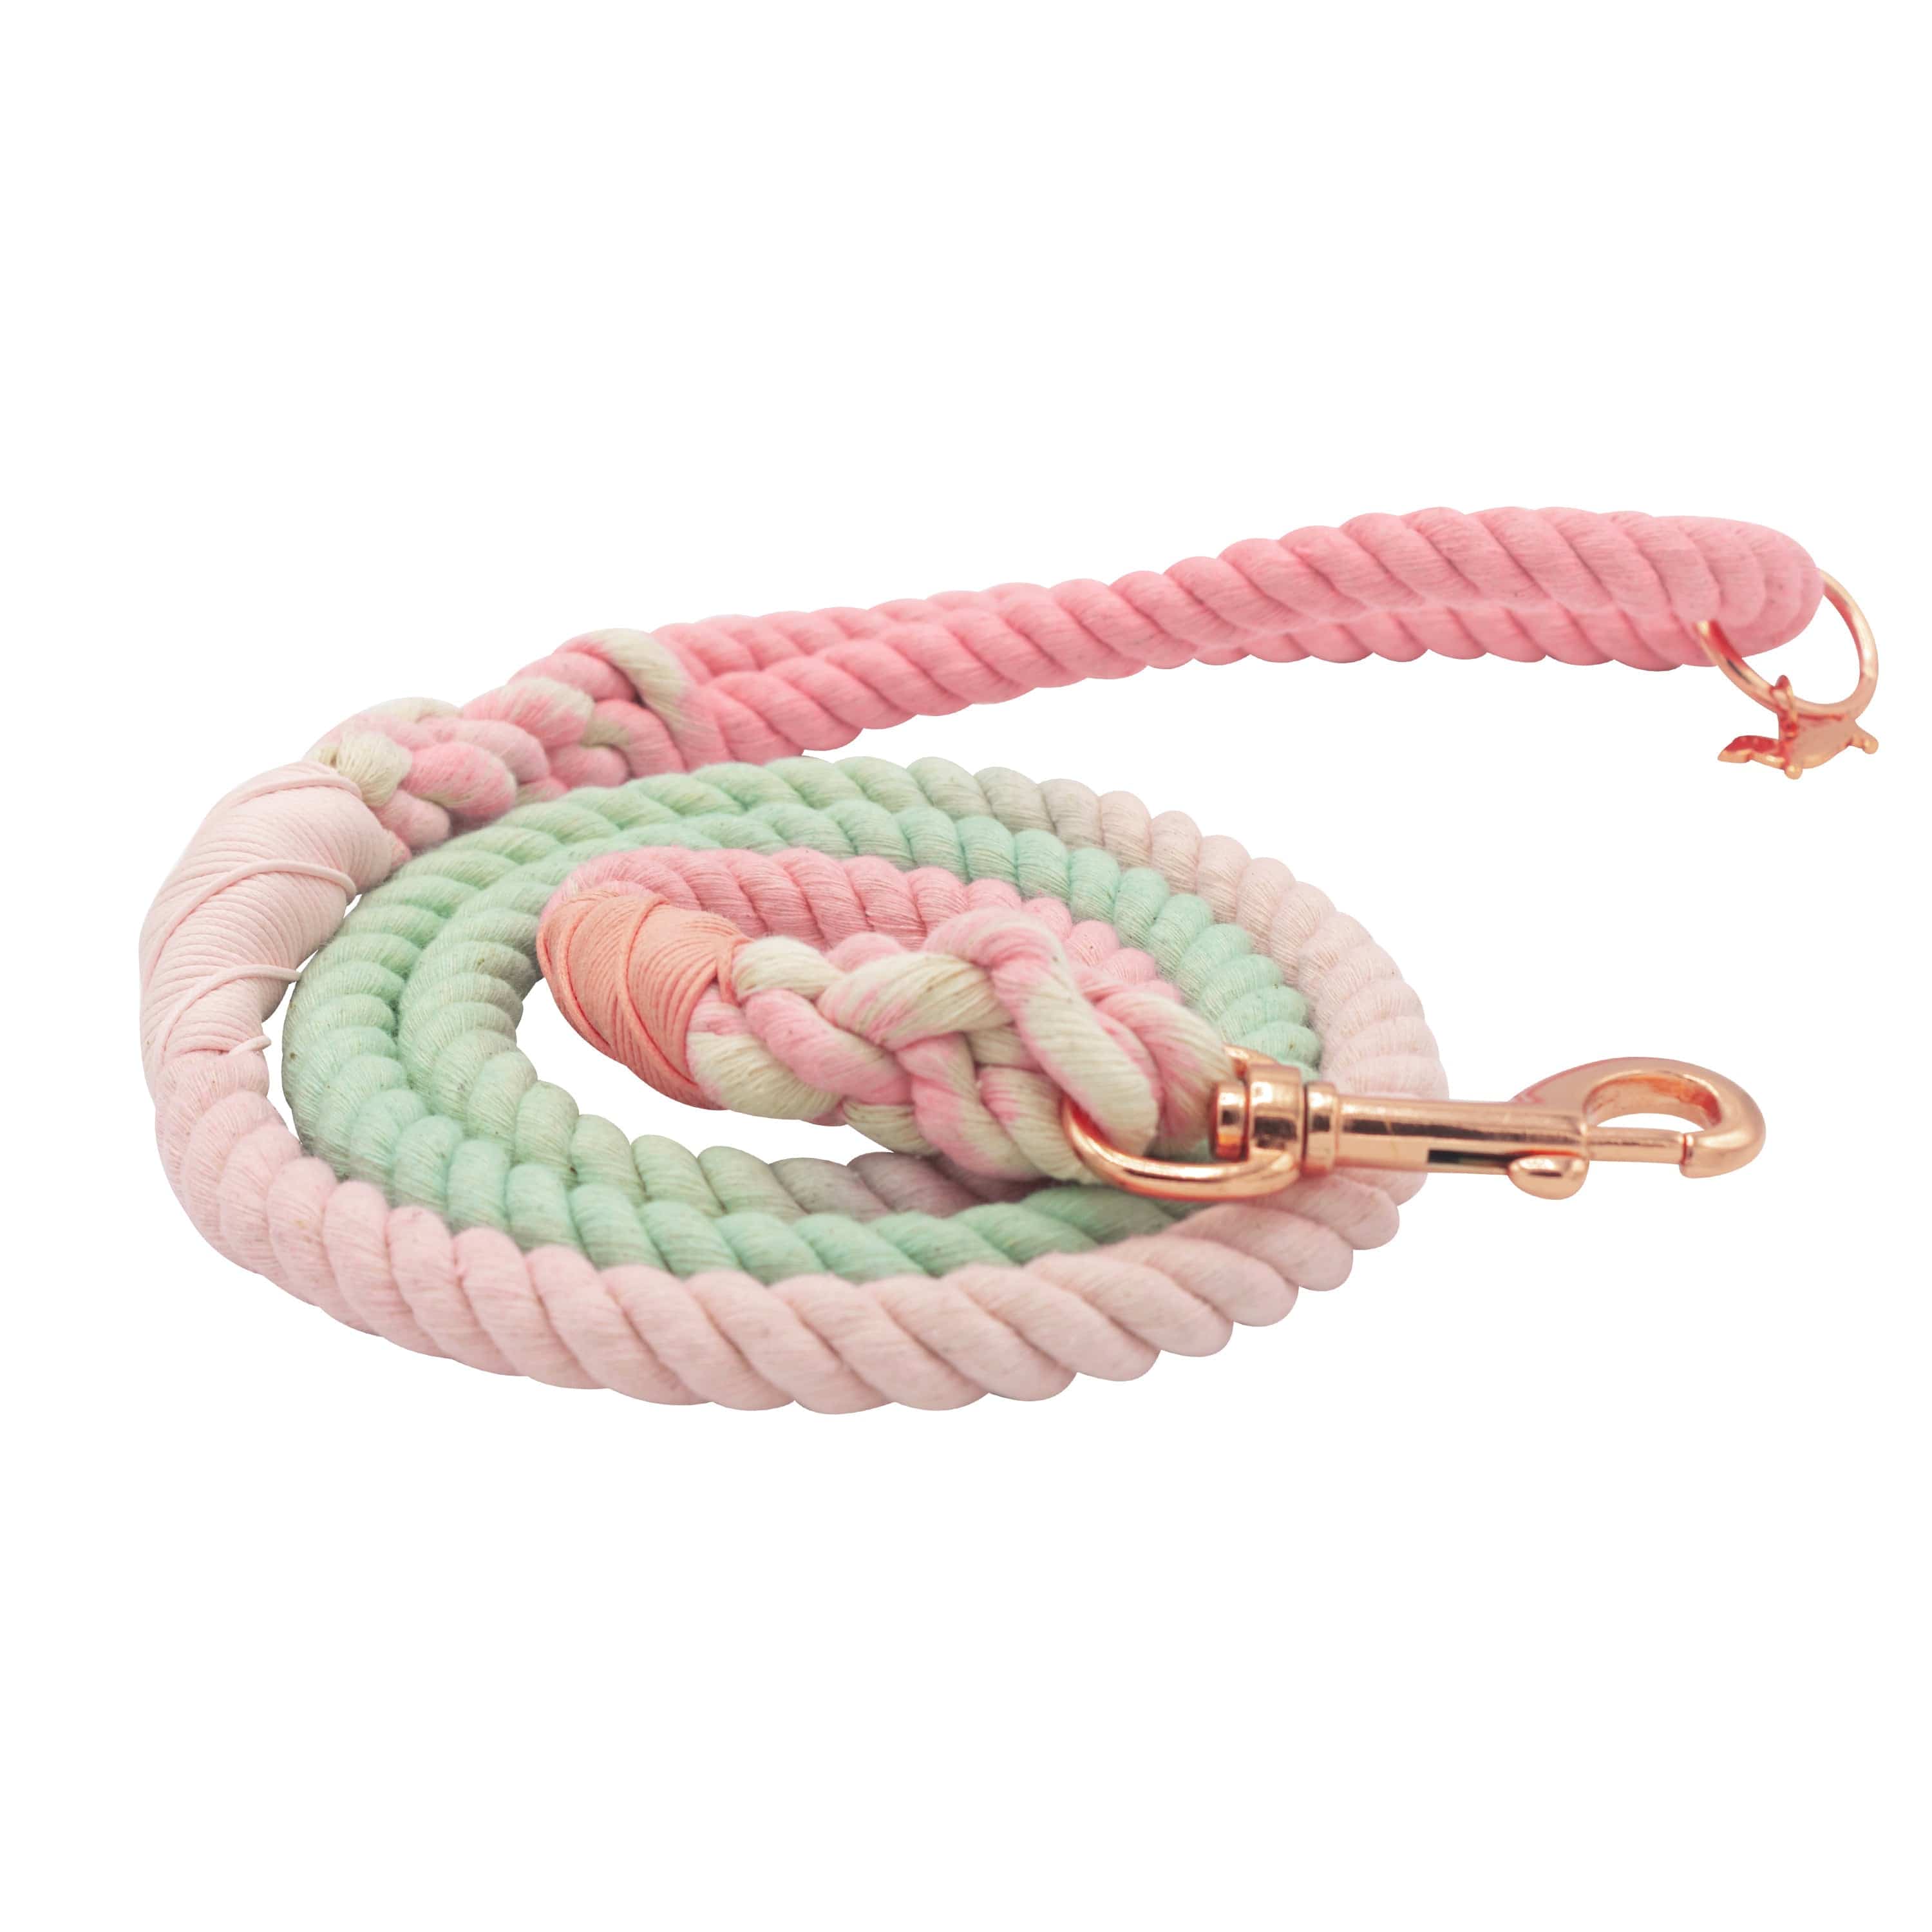 Rope Leash - Sherbet by Sassy Woof